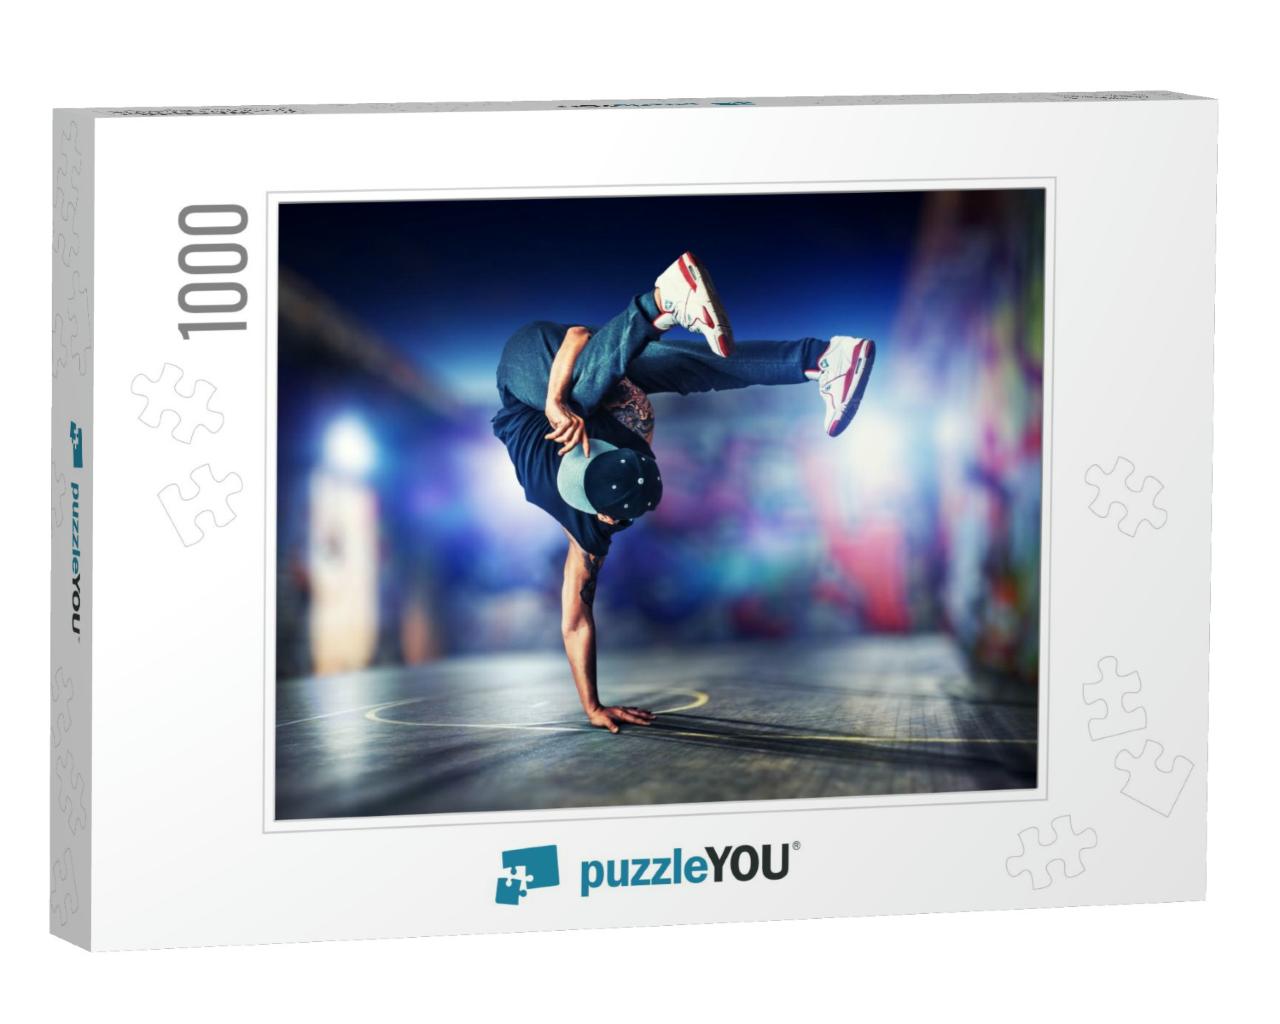 Young Man Break Dancing At Night on Urban Painted Walls B... Jigsaw Puzzle with 1000 pieces